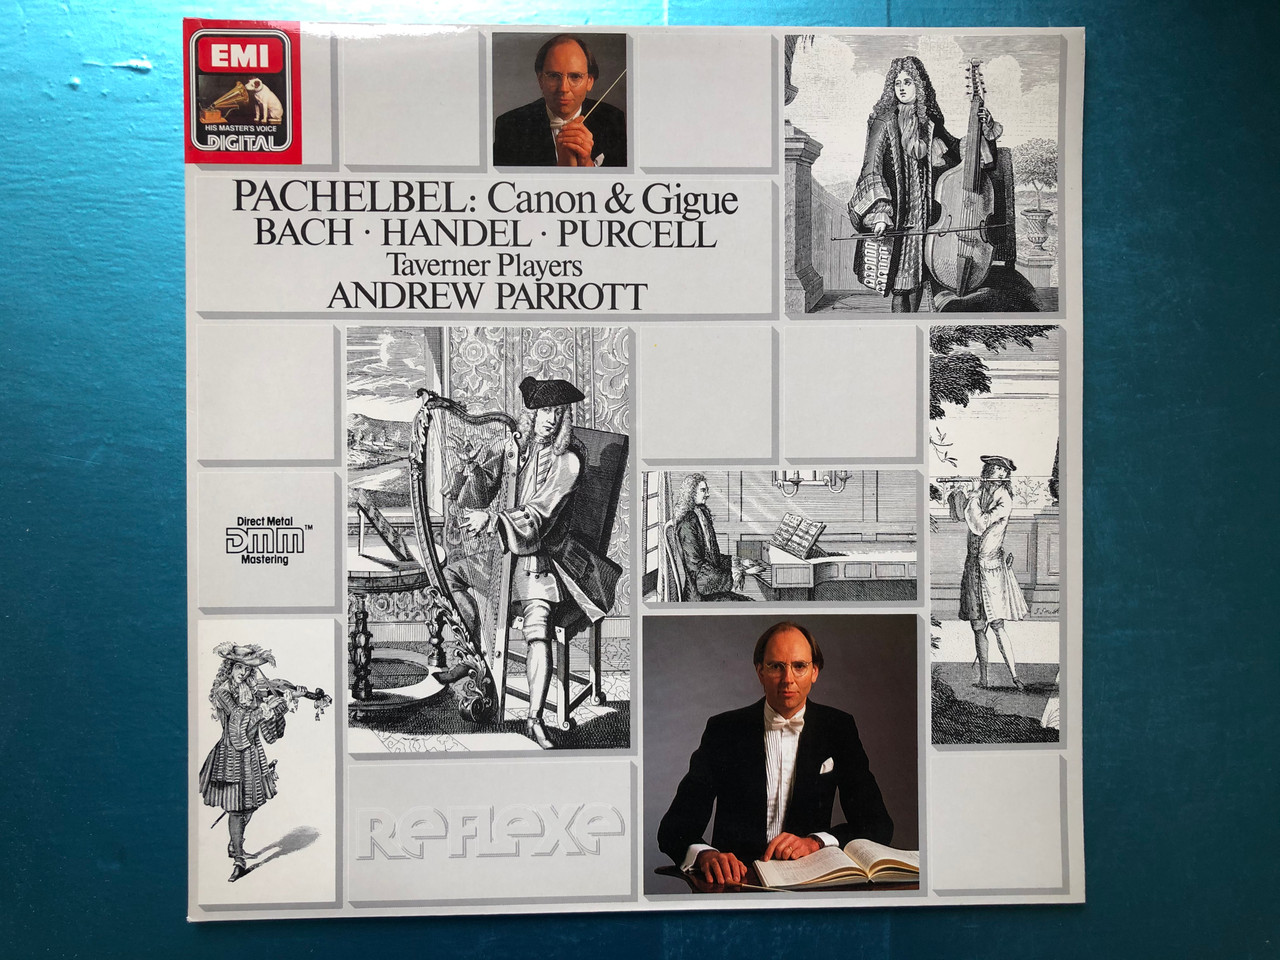 https://cdn10.bigcommerce.com/s-62bdpkt7pb/products/30646/images/181095/Pachelbel_Canon_Gigue_Bach_Georg_Hndel_Purcell_Taverner_Players_Andrew_Parrott_His_Masters_Voice_LP_Stereo_7_69853_1_1__24617.1623422746.1280.1280.JPG?c=2